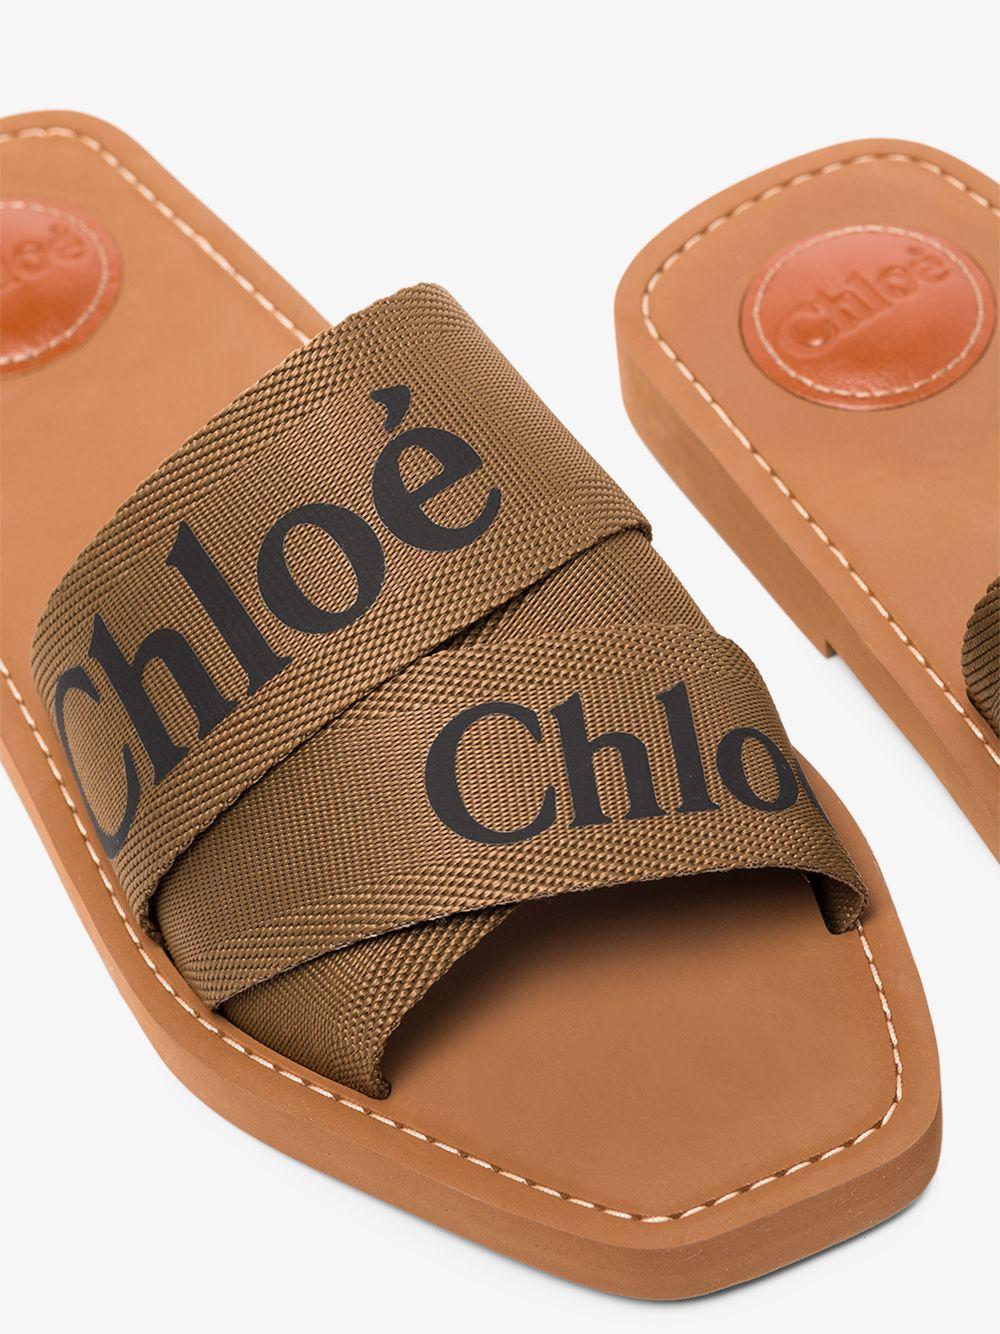 Chloé Synthetic Woody Logo Sandals in Brown - Lyst